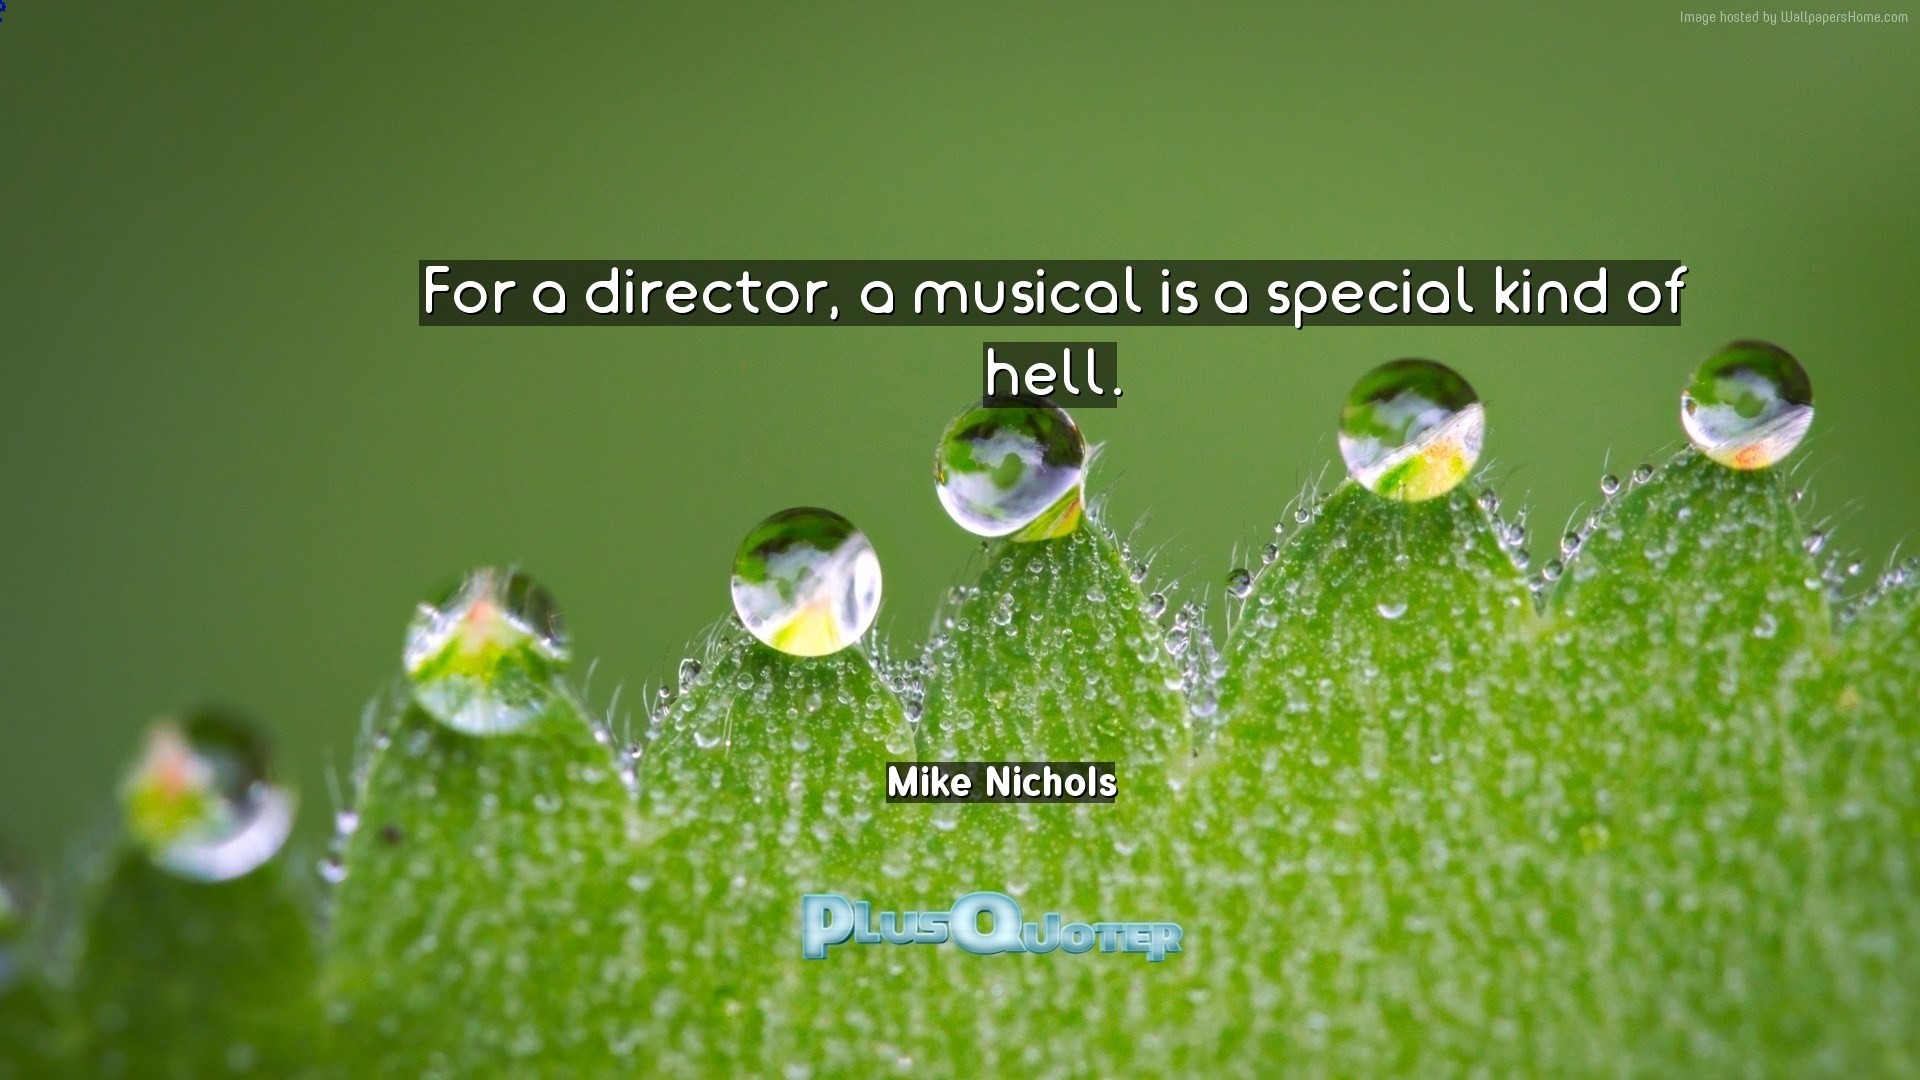 1920x1080 Download Wallpaper with inspirational Quotes- "For a director, a musical is  a special